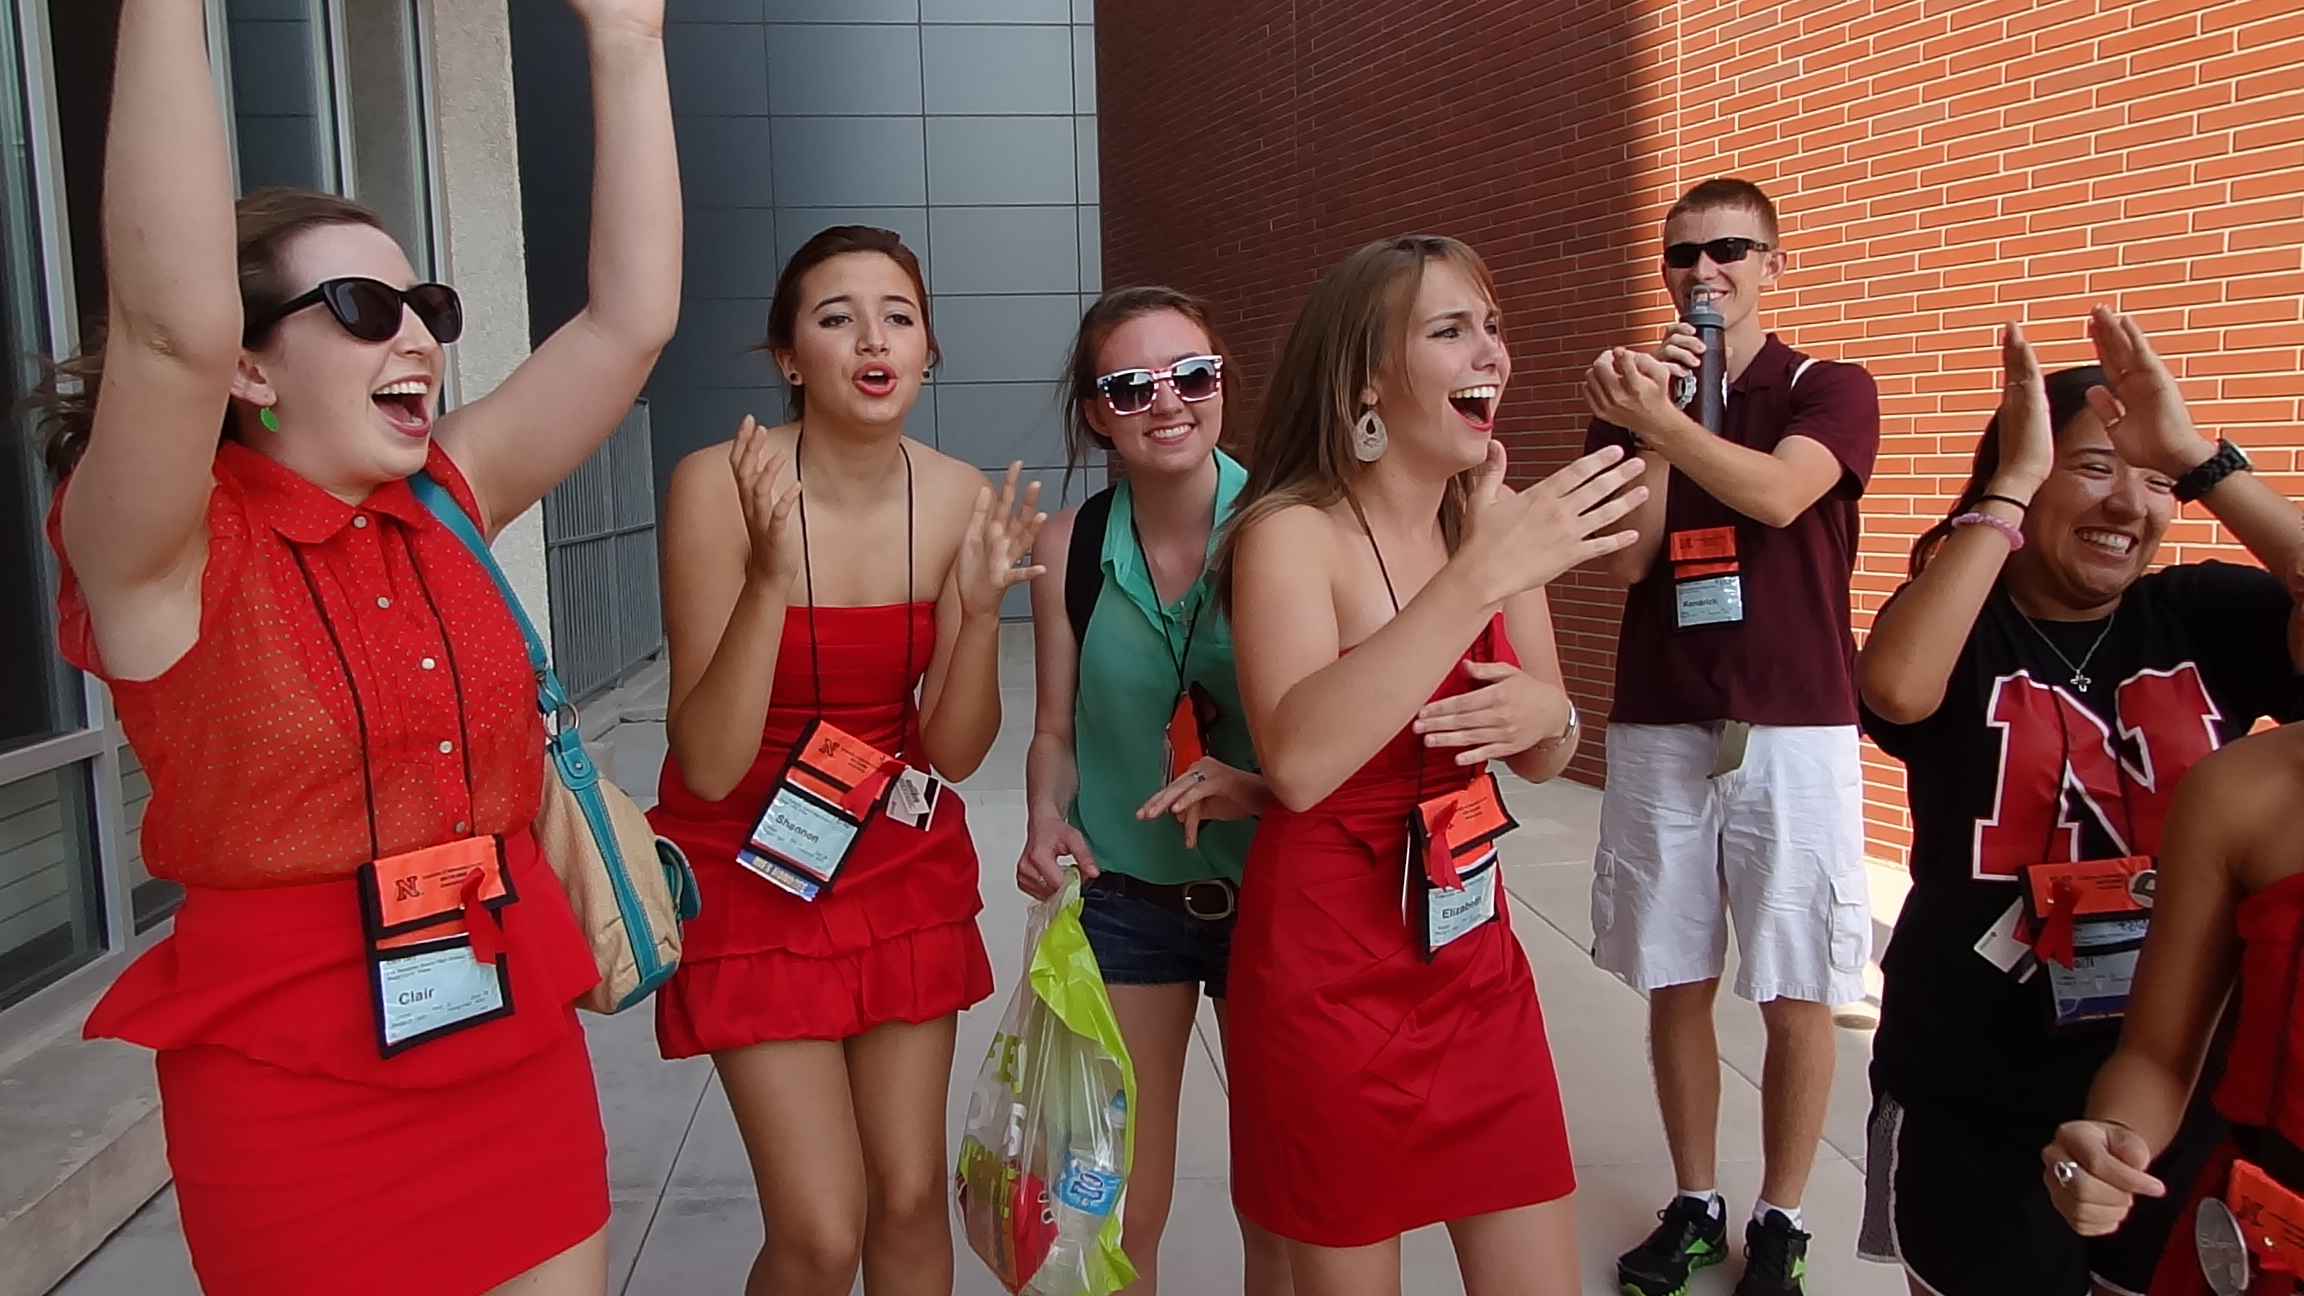 Elizabeth, Clair, Shannen, Kate, Kelly & Ki-mei celebrate the news that they won the 2012 National Championship in Group Musical at the International Thespian Festival in Lincoln, Nebraska.